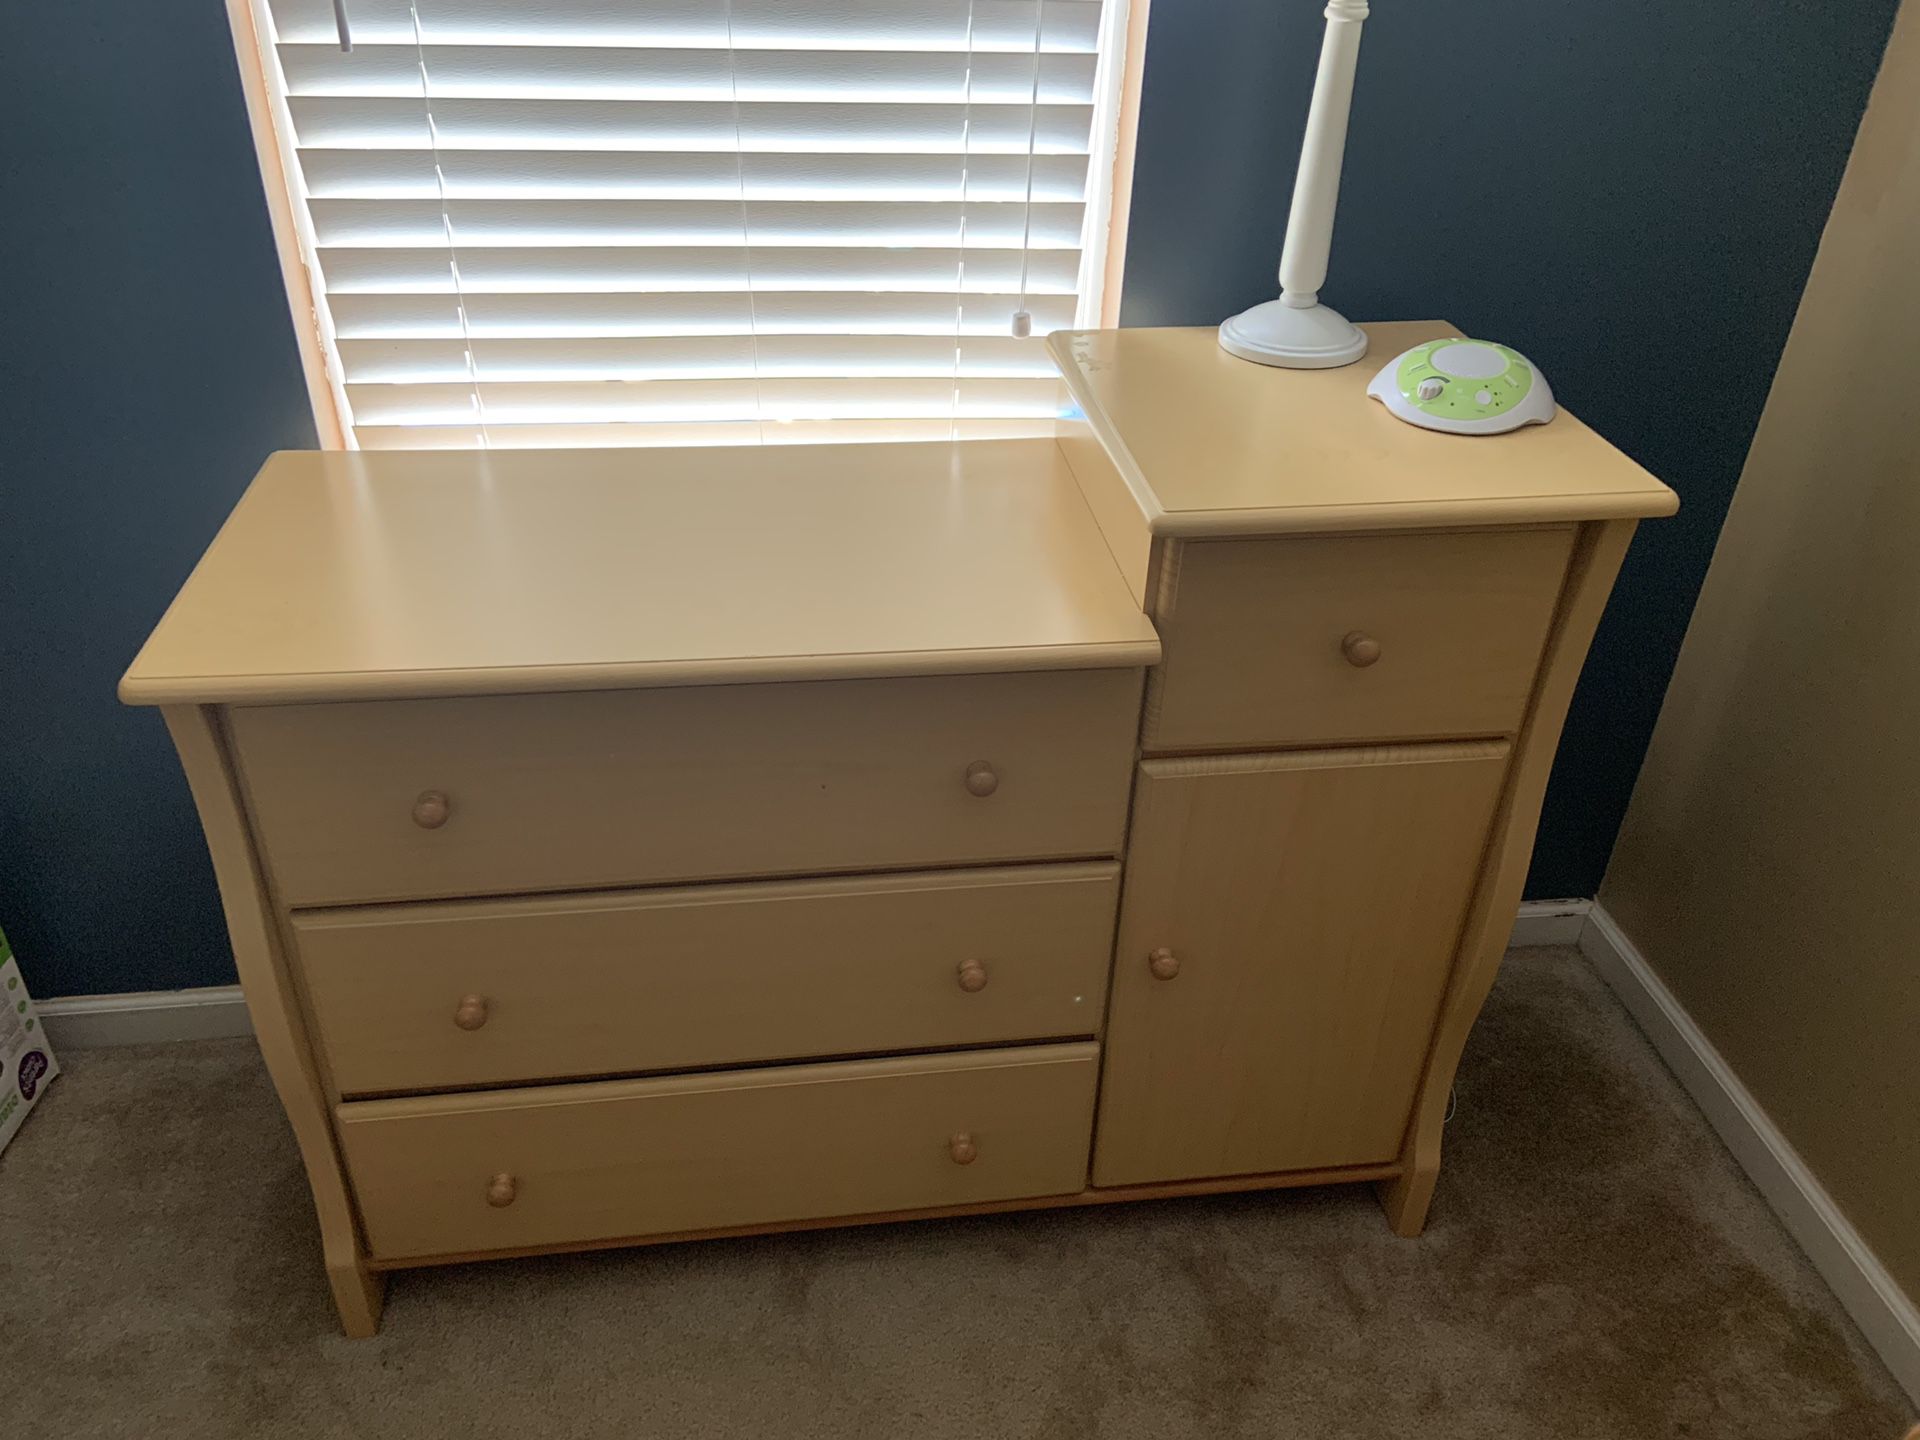 Baby dresser / changing table - wooden furniture from Babies r us